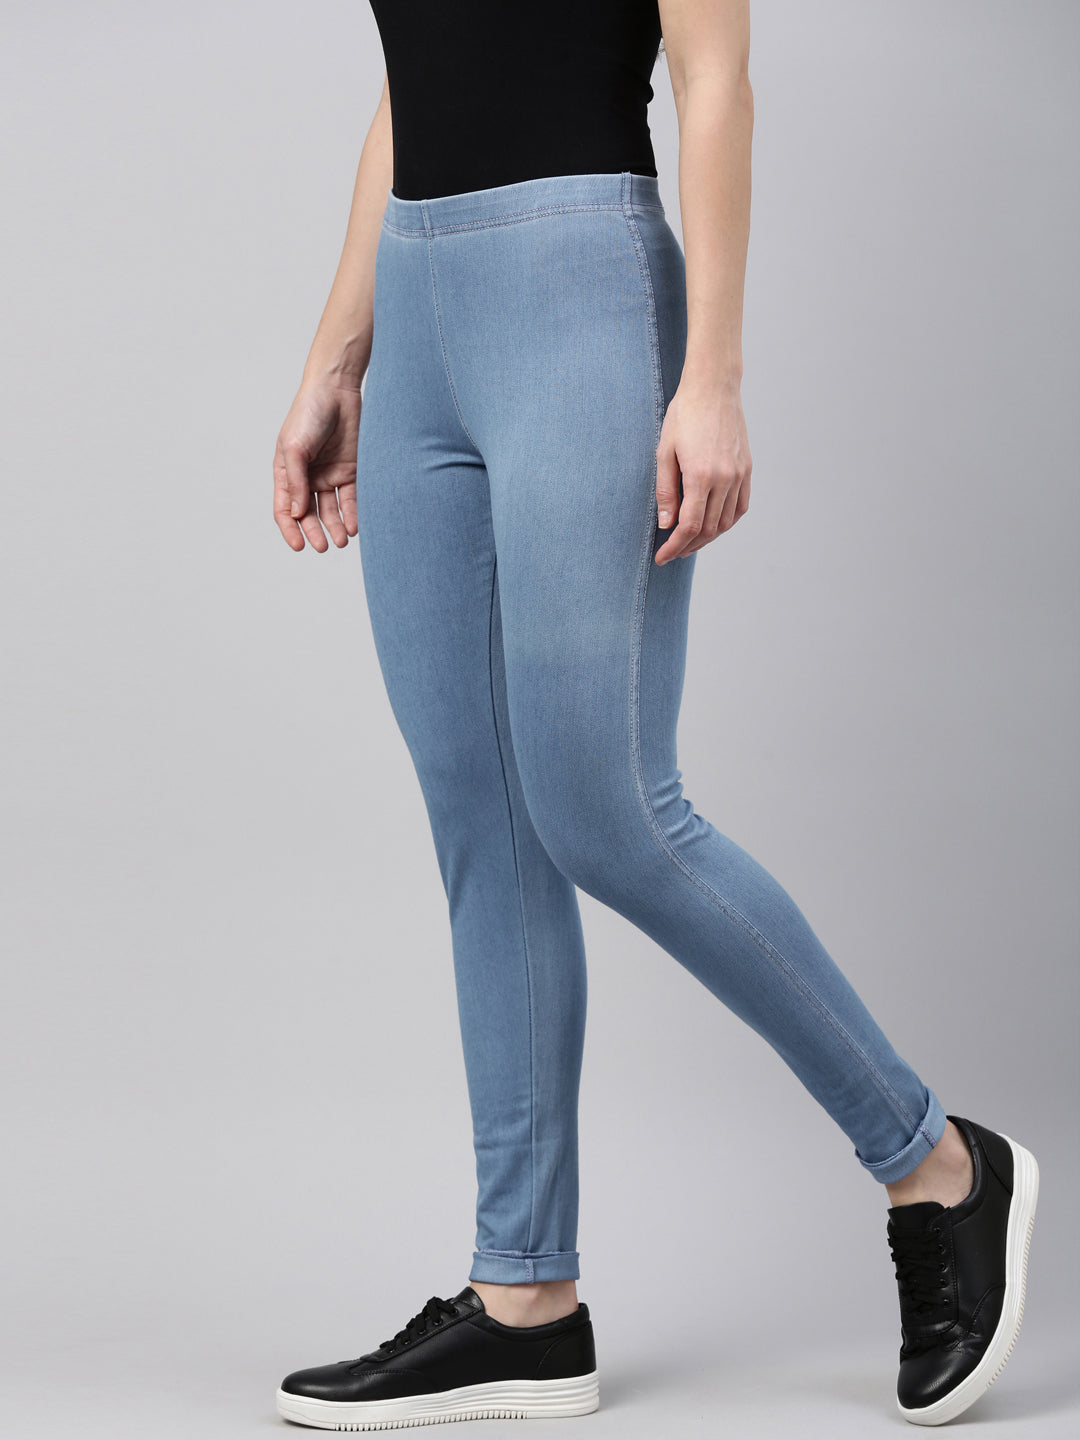 Denim effect leggings in low and high waist for all sizes